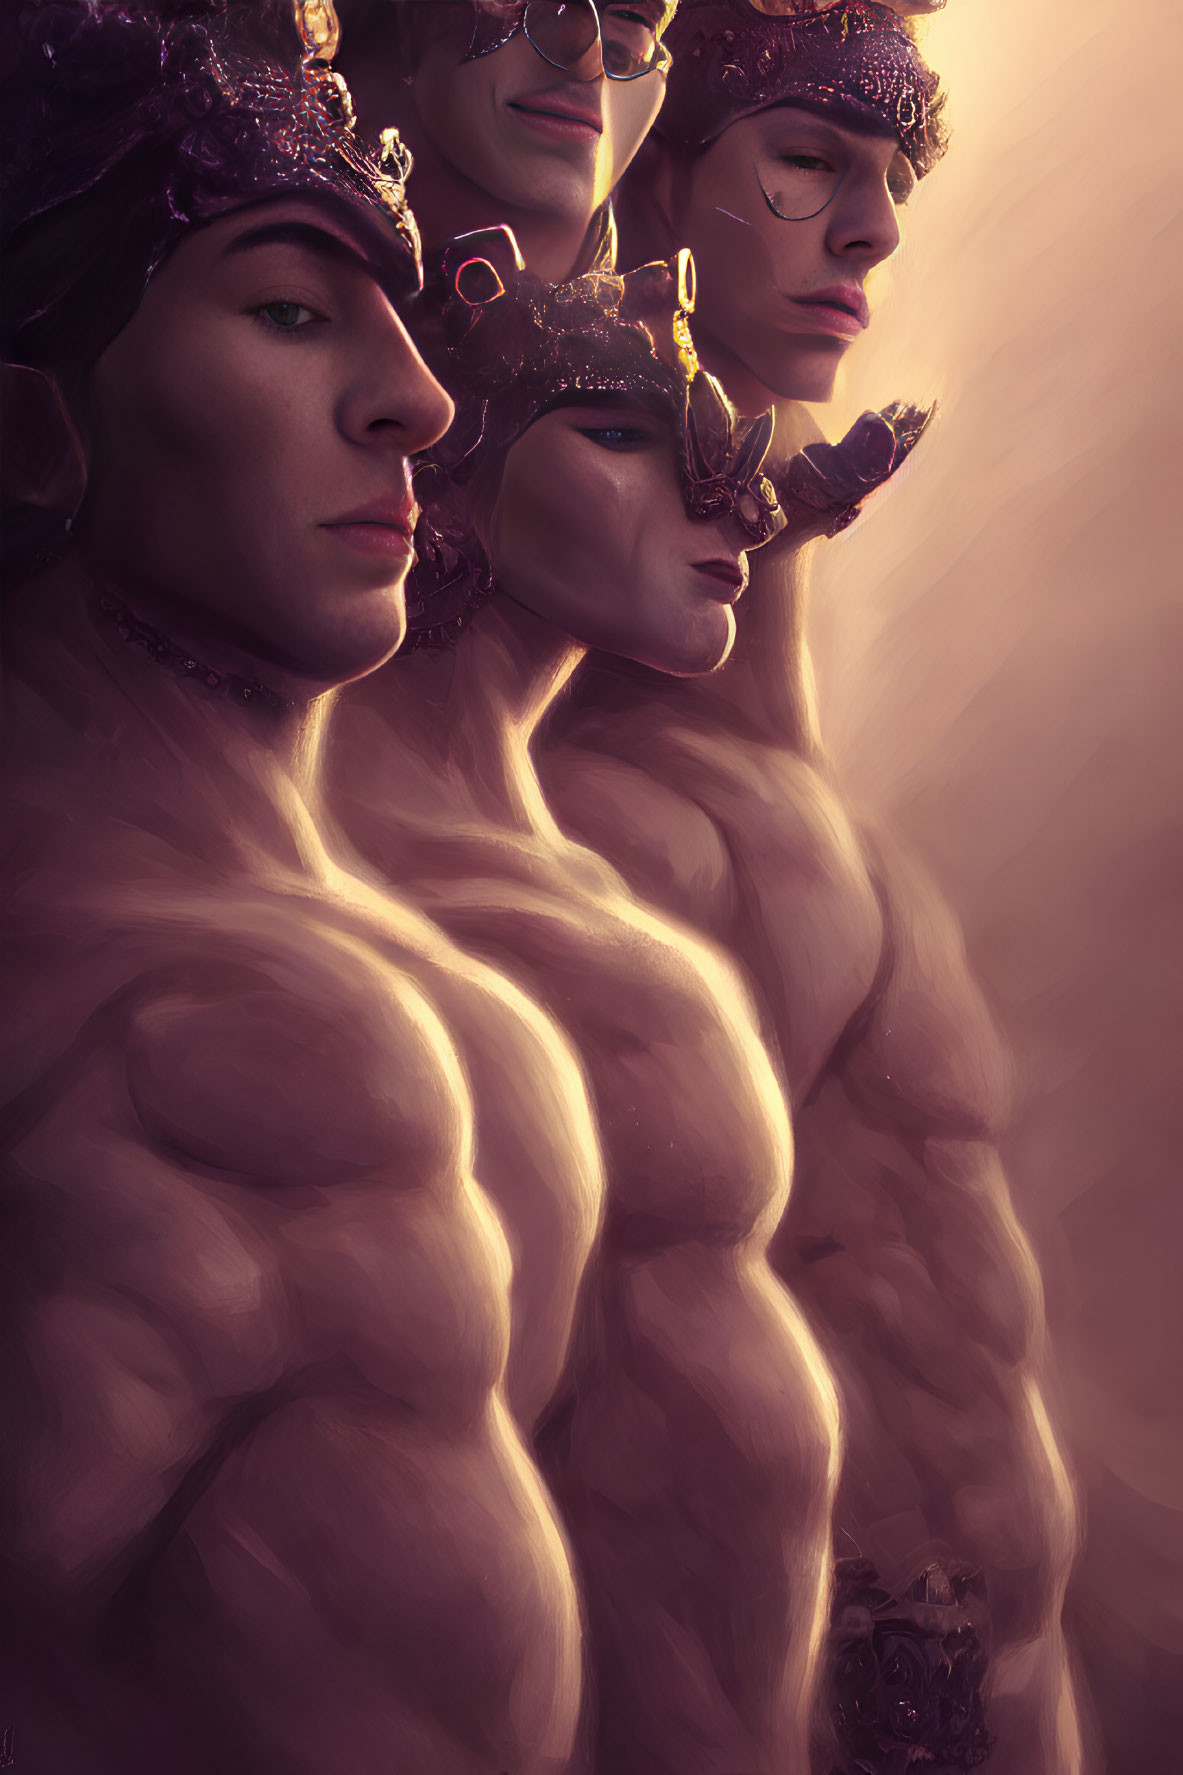 Digital painting of male figures in ornate purple headpieces, with contemplative expressions